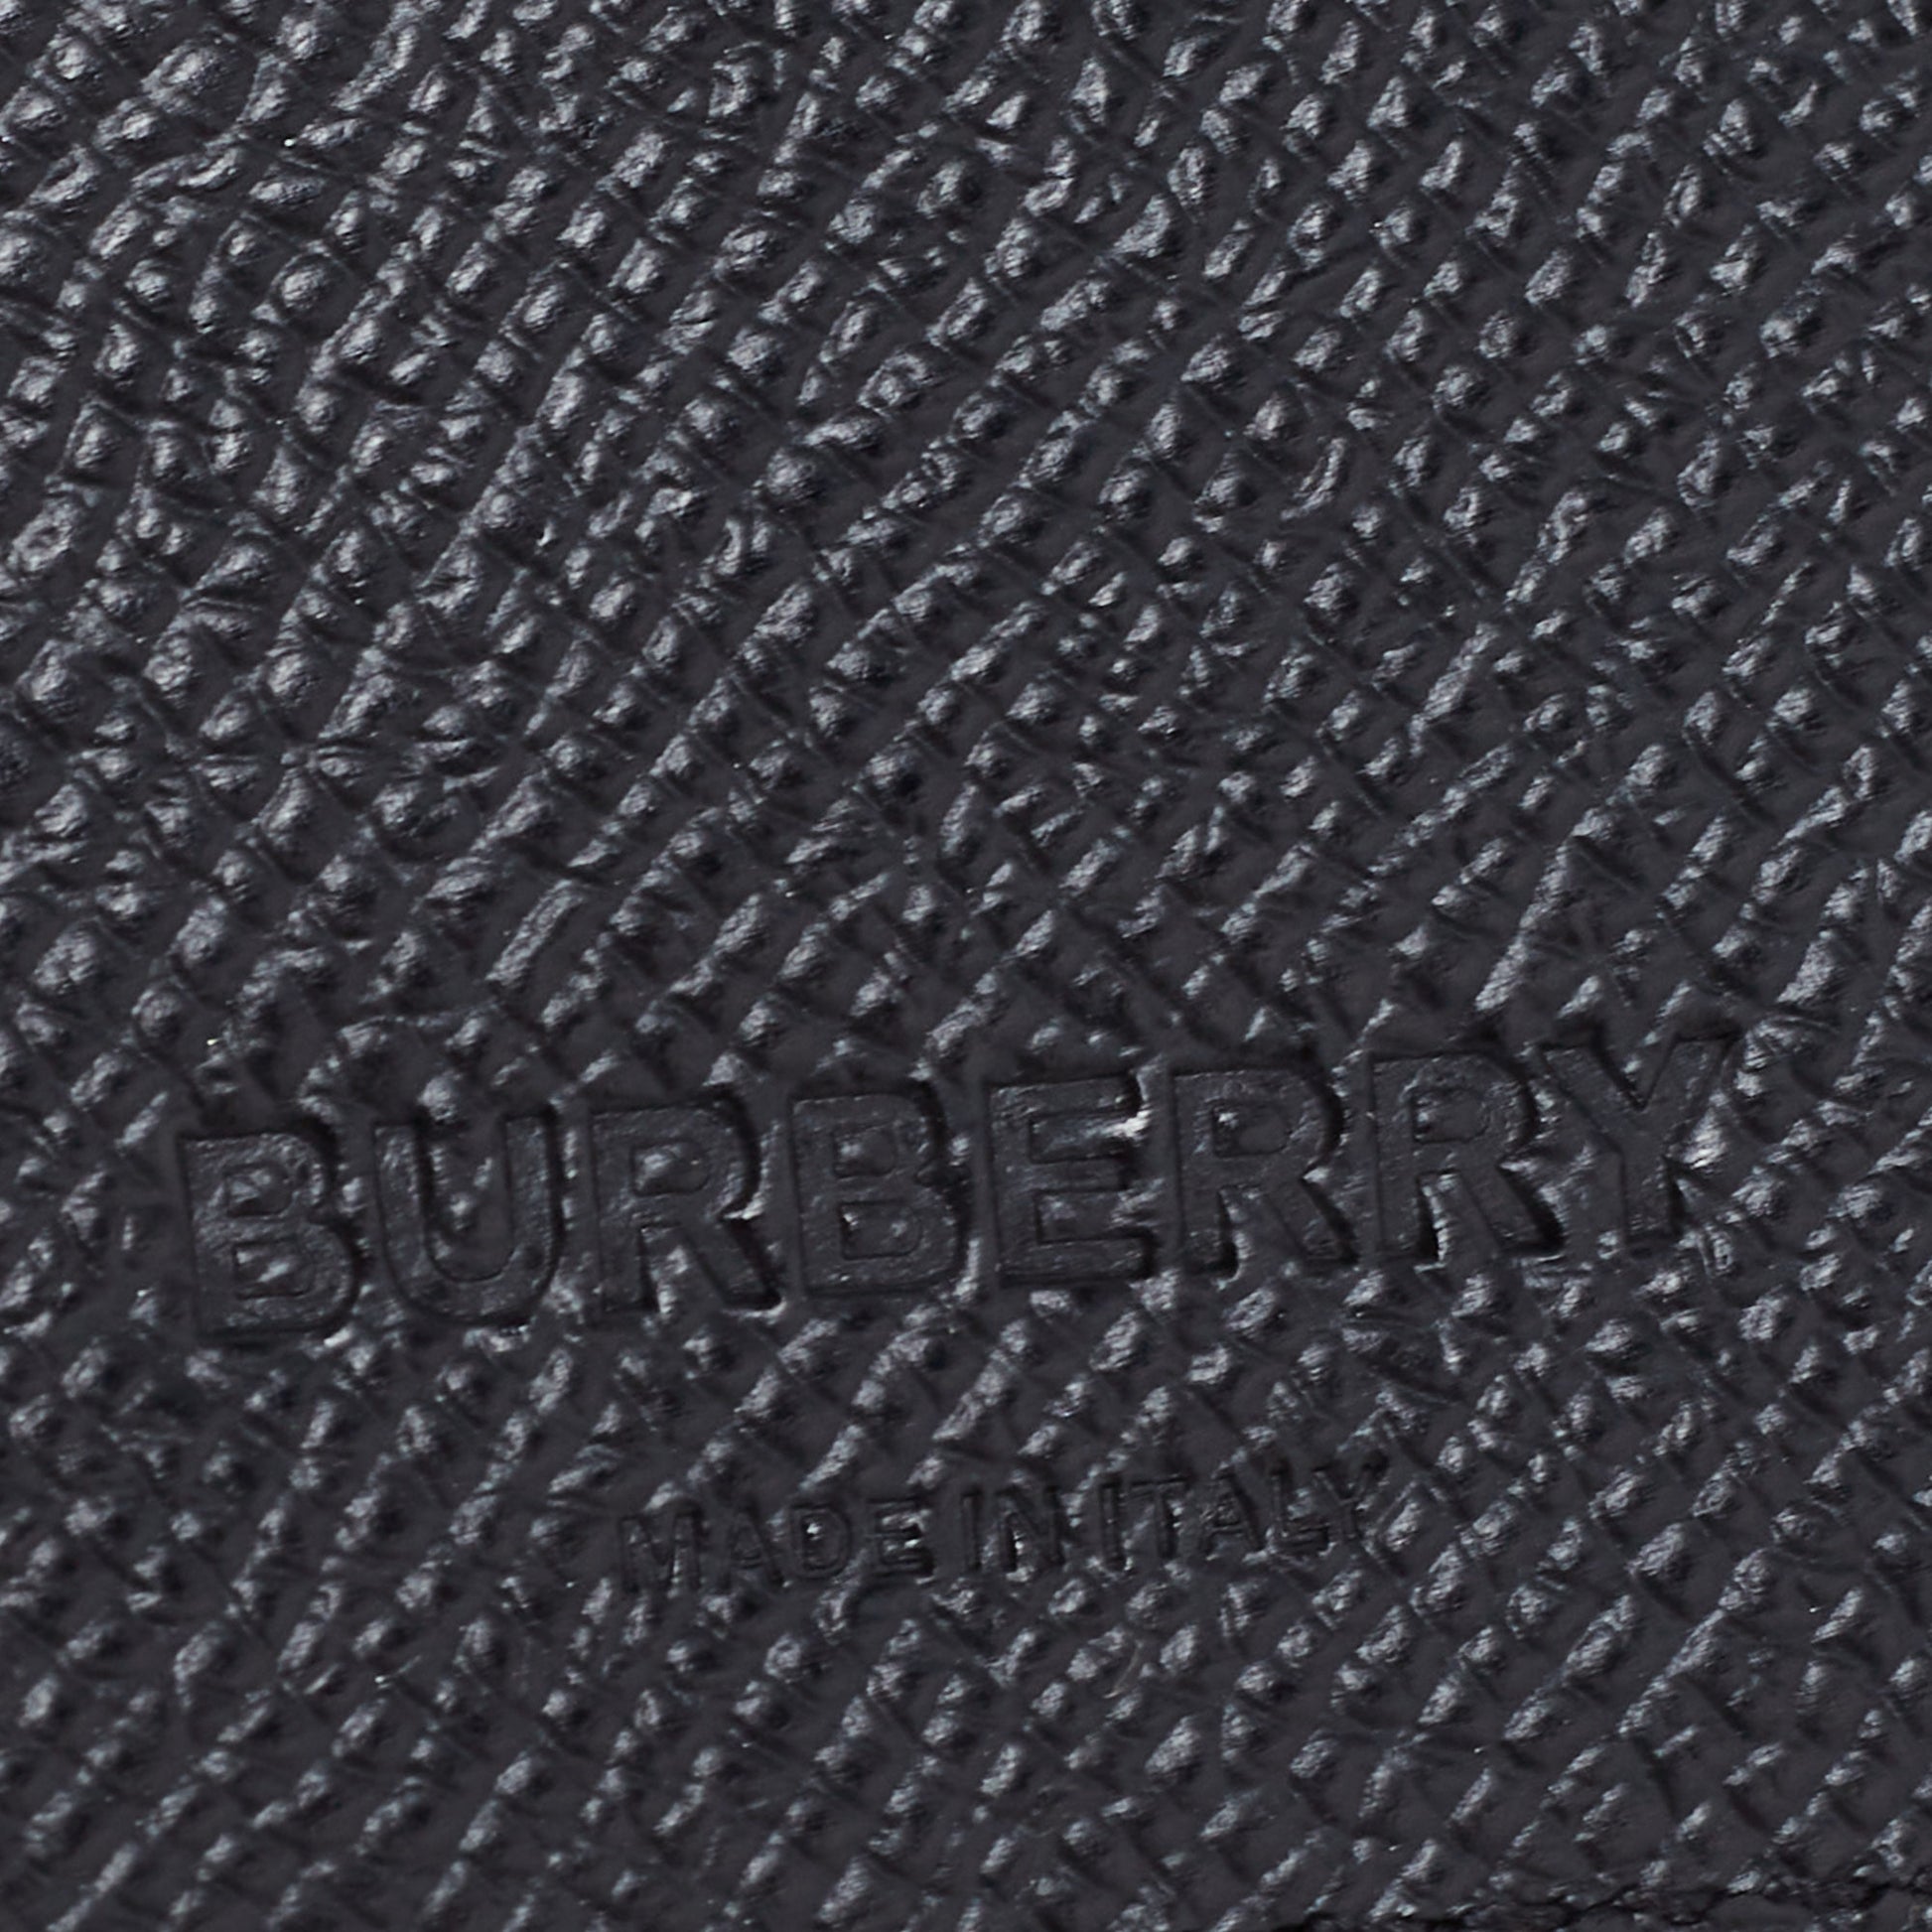 BRAND NEW BURBERRY BLACK LEATHER BIFOLD LONG WALLET 8052834